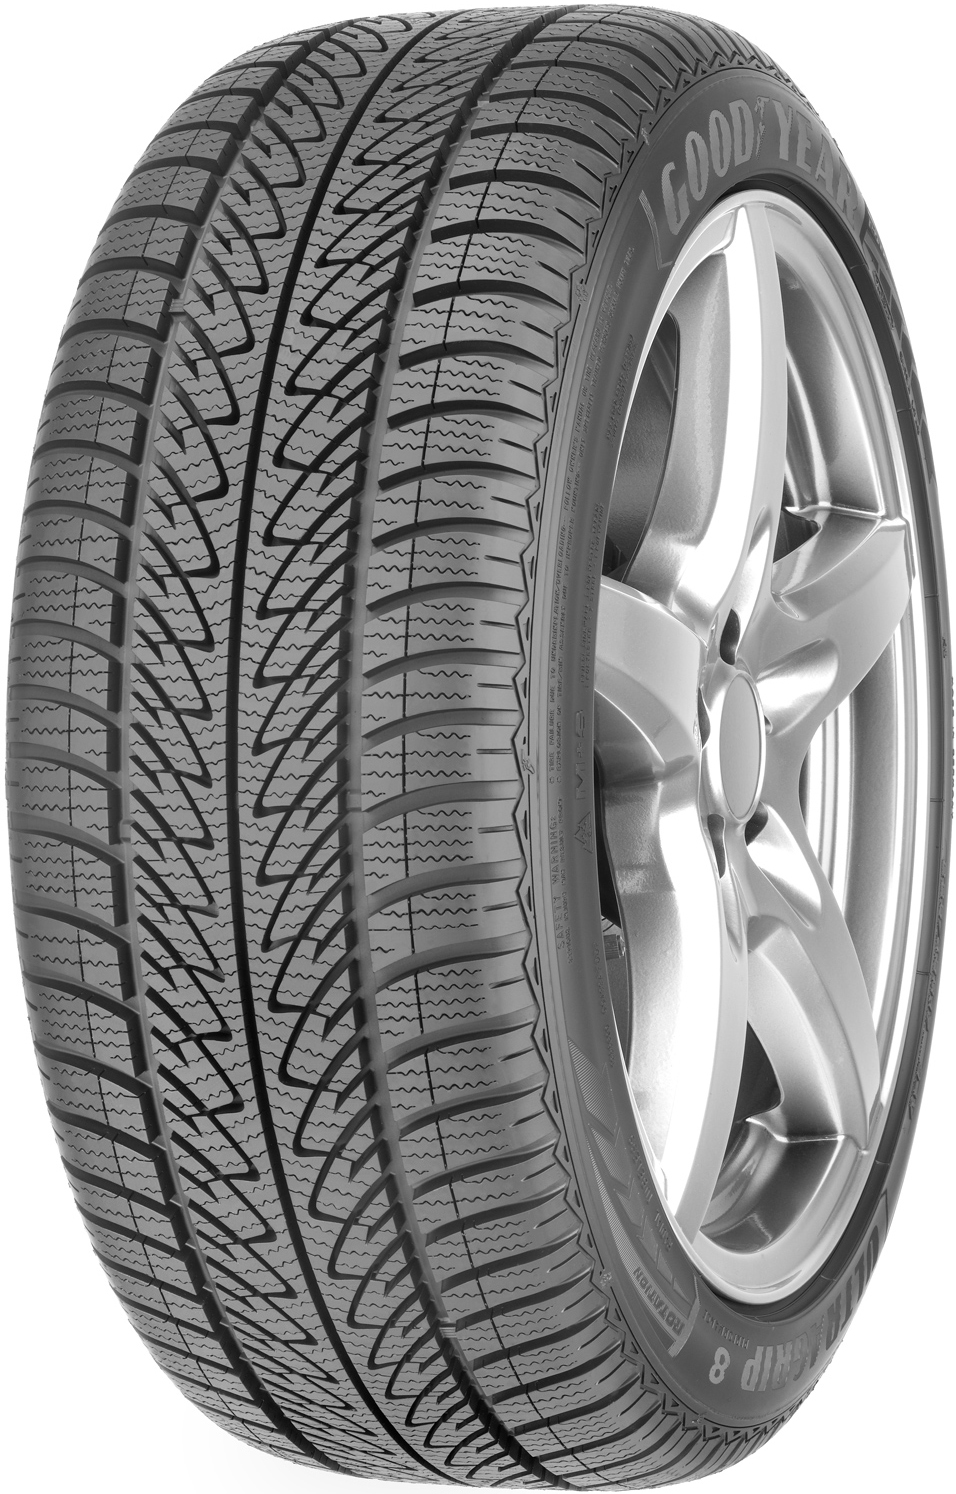 Anvelope auto GOODYEAR ULTRA GRIP 8 PERFORMANCE MS XL RFT BMW FP 245/45 R19 102V